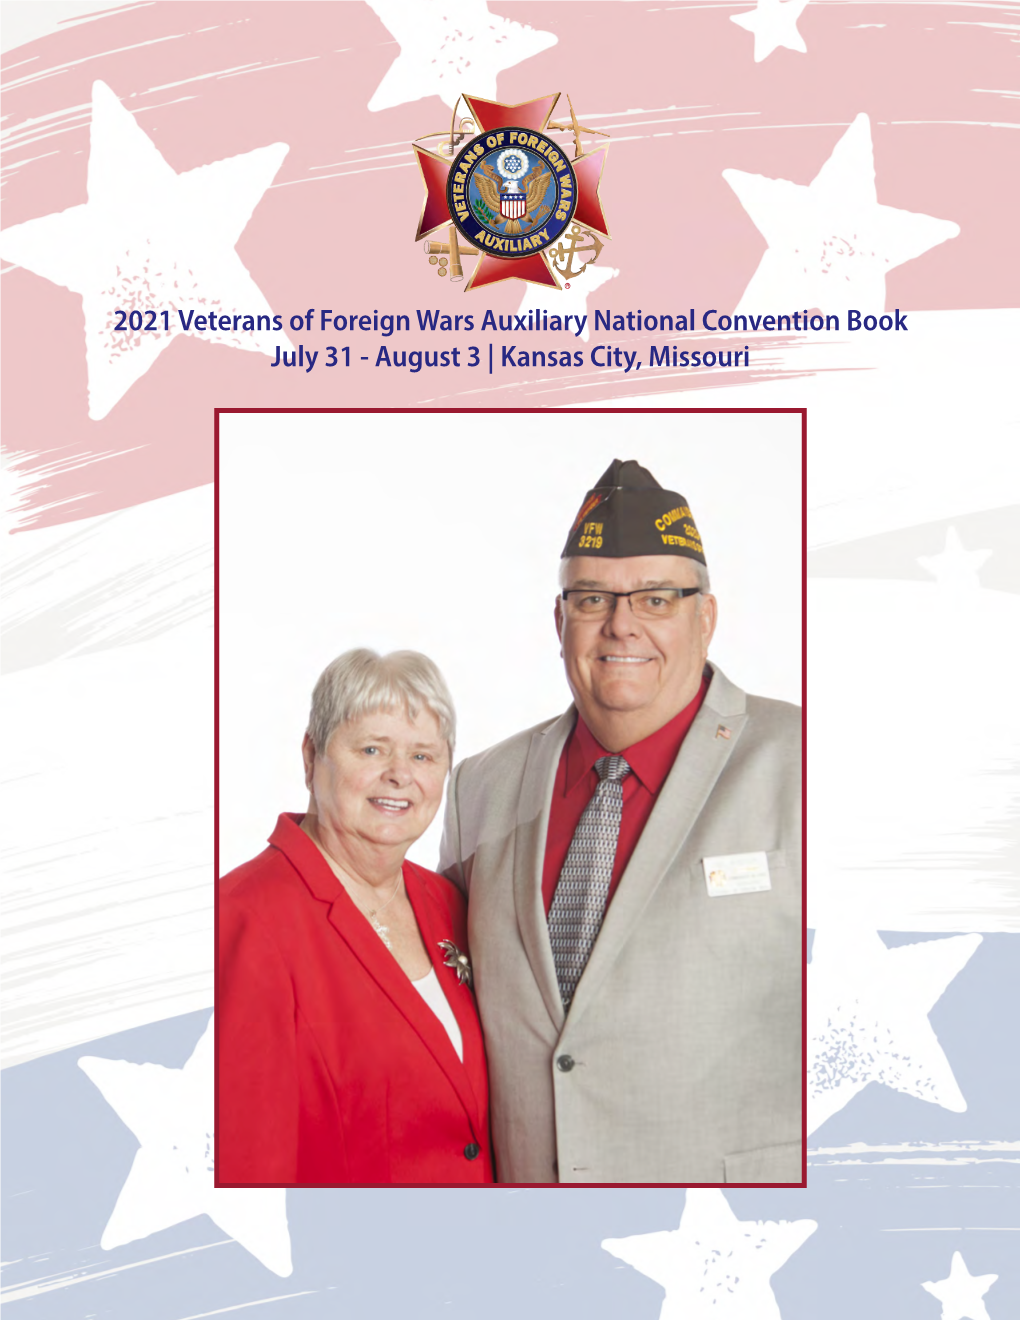 2021 Veterans of Foreign Wars Auxiliary National Convention Book July 31 - August 3 | Kansas City, Missouri STOP by OUR BOOTH GET YOUR CONVENTION SOUVENIRS